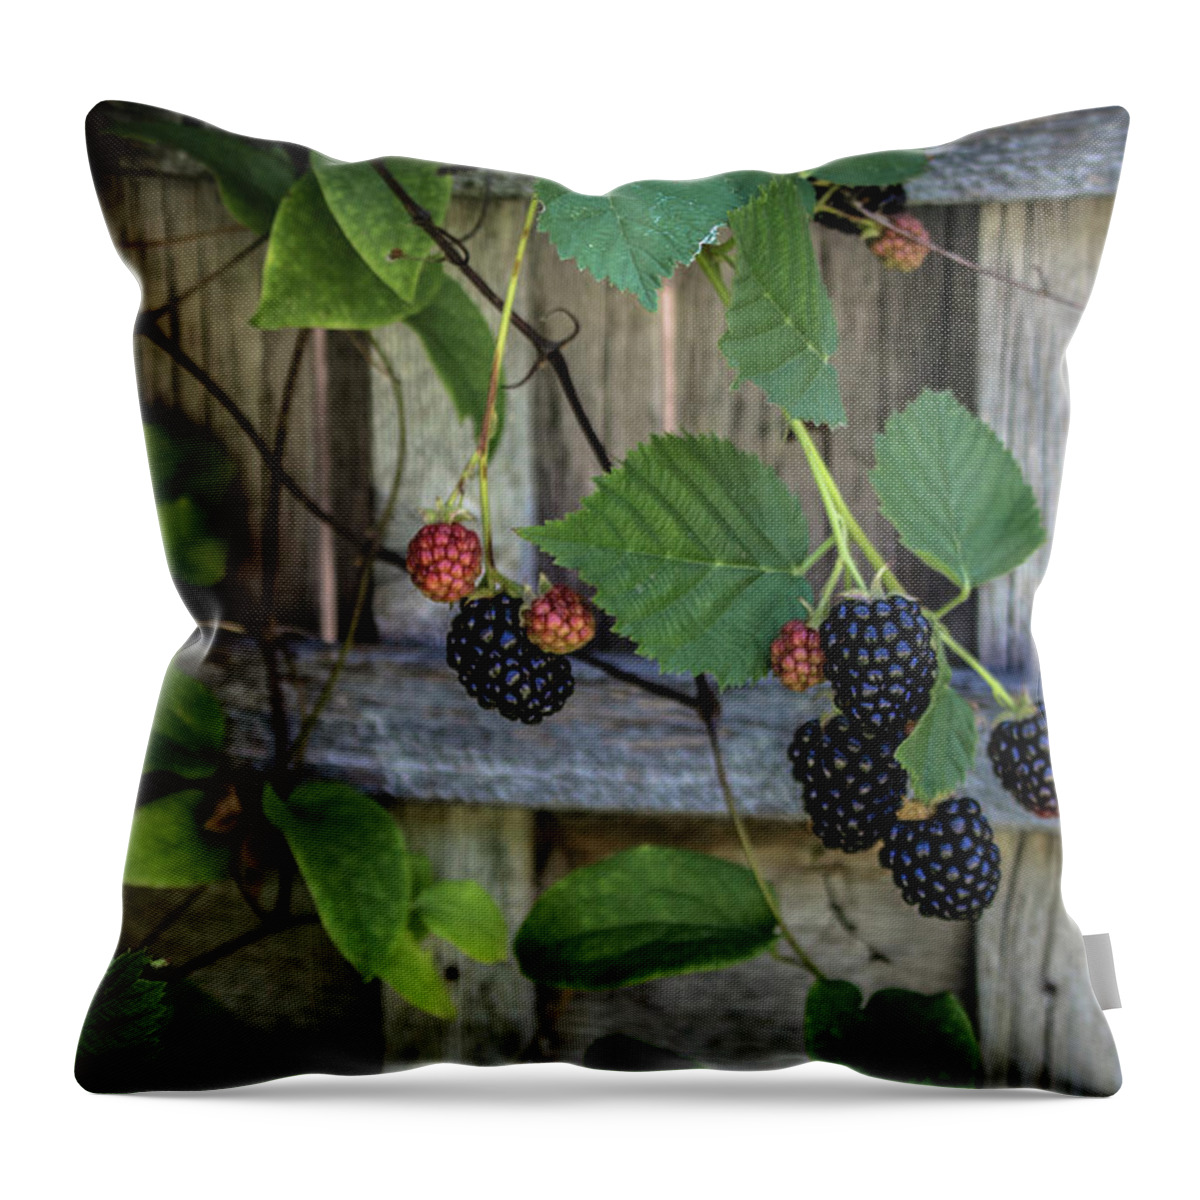 Berries Throw Pillow featuring the photograph Blackberries by K Bradley Washburn